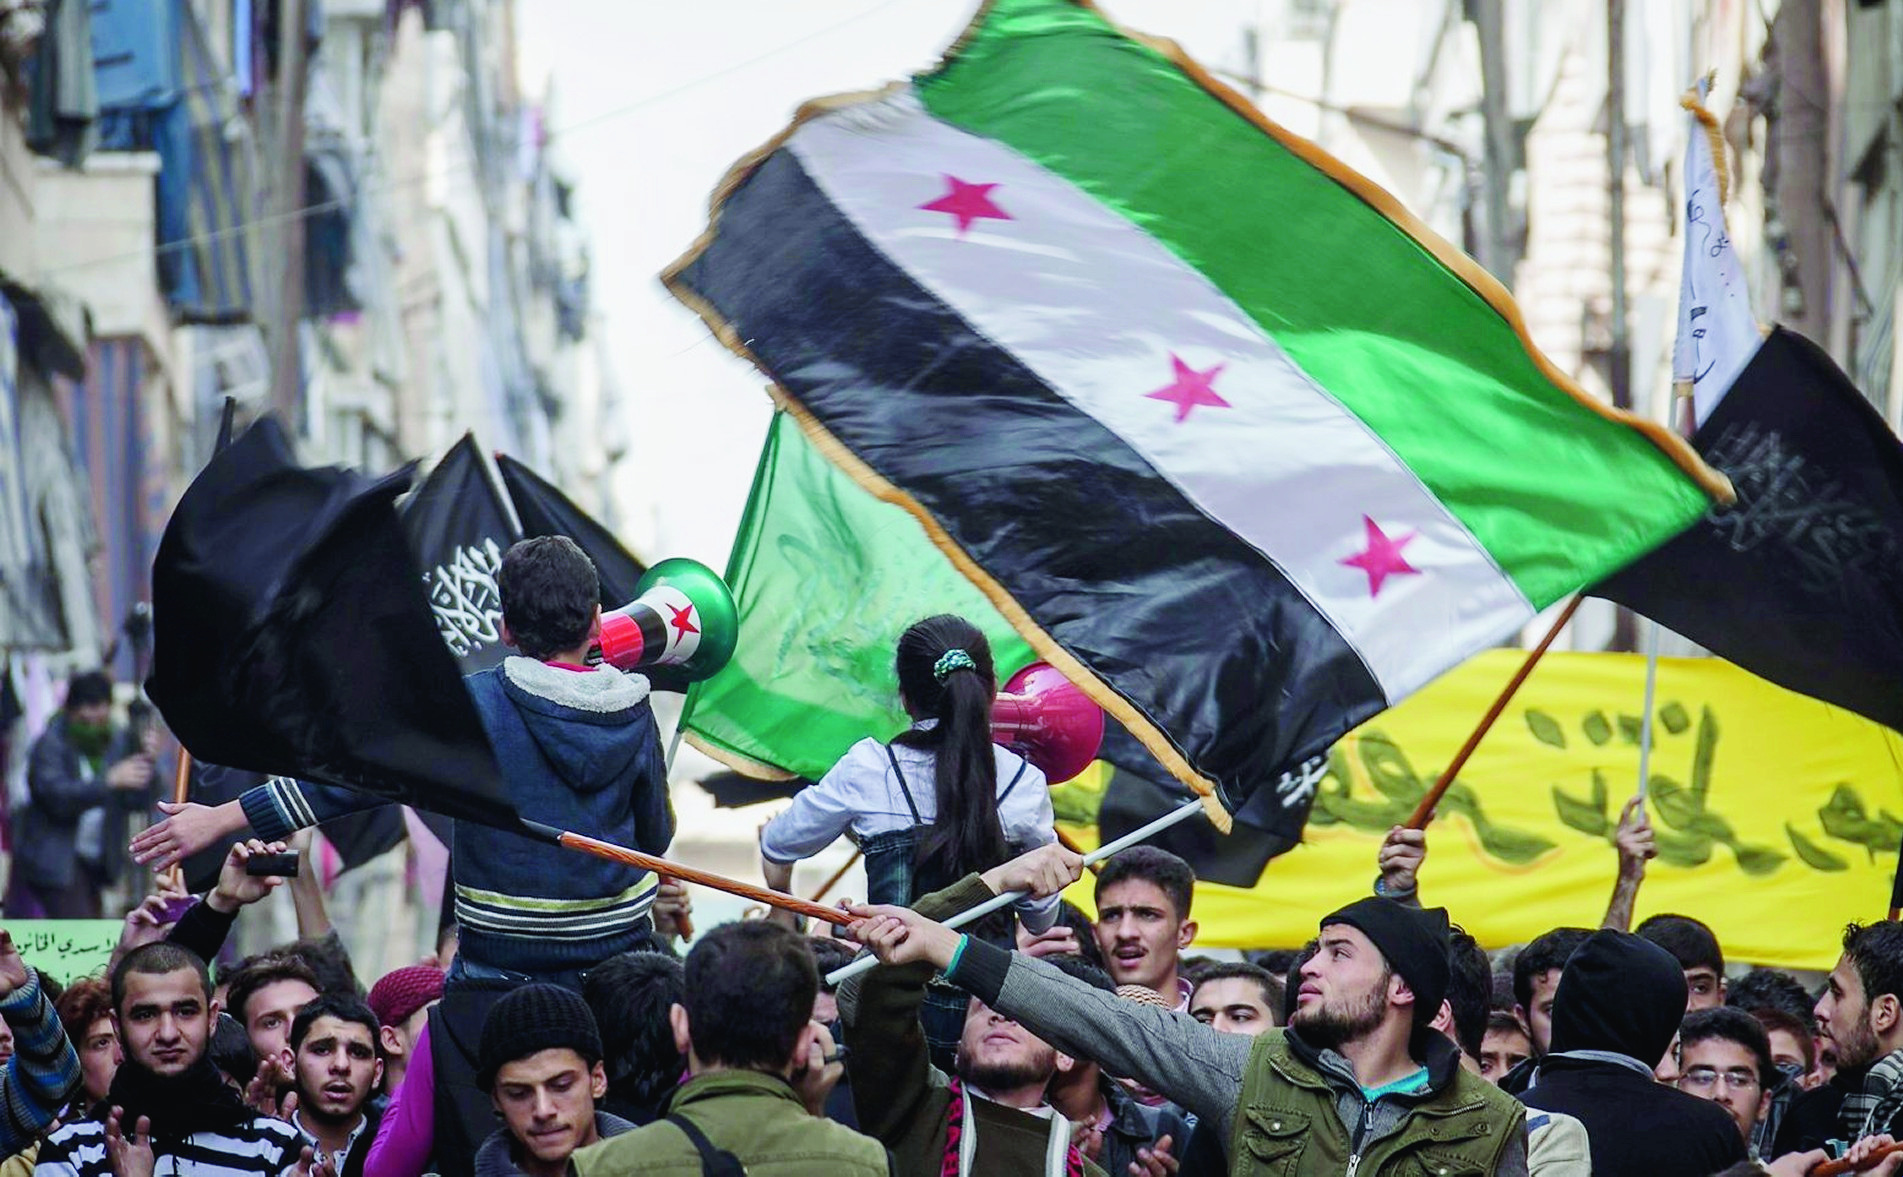 In this Friday, Nov. 30, 2012 photo, Syrians chant slogans and wave revolutionary flags during a demonstration after Friday prayers in the Bustan Al-Qasr district of Aleppo, Syria. After months of fighting, thousands of residents have returned to the city as they attempt to return to their daily lives while heavy fighting is still taking place along the front lines in the city. Public demonstrations have unfolded after several weeks of silence as residents demand an end to the violence in Aleppo. (AP Photo/Narciso Contreras) Mideast Syria